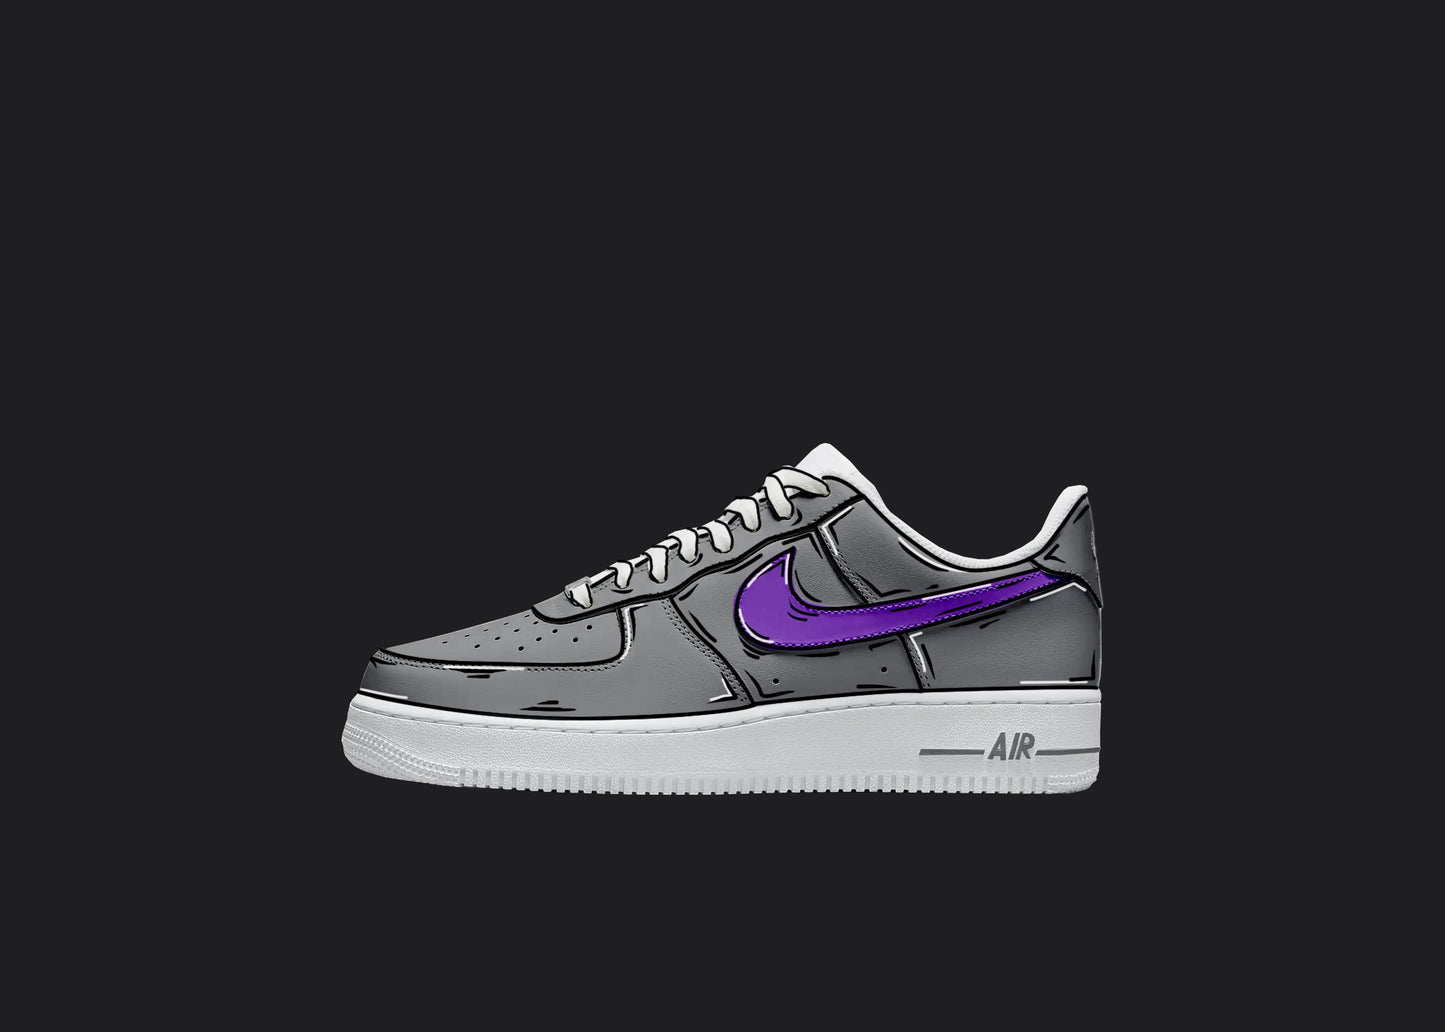 white nike air force 1 low model side view on a black plain background. the sneaker is custom painted in gray with a purple nike logo swoosh. The color designs are covered in cartoon outline like details all over the sneaker in white and black